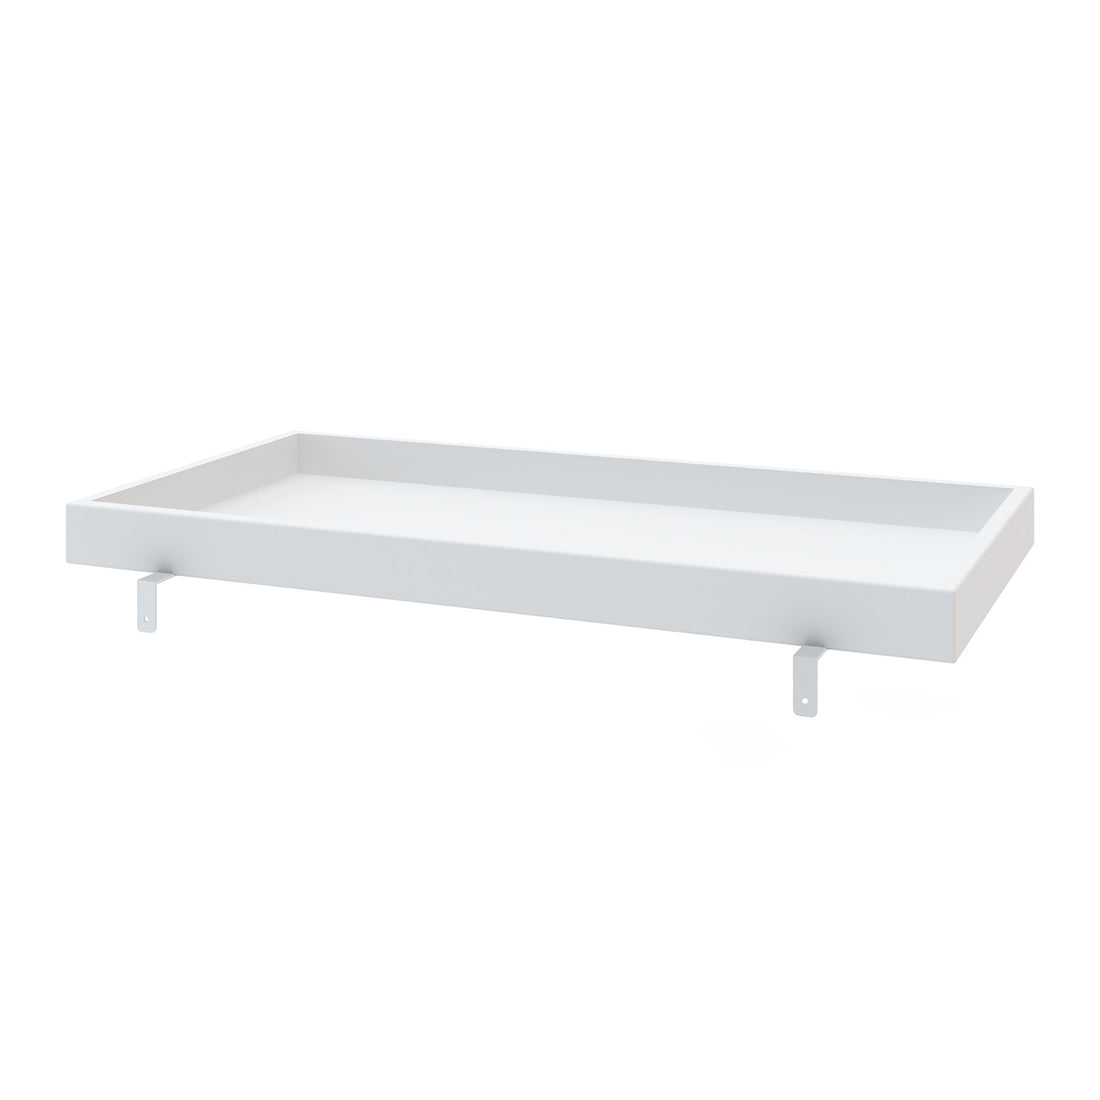 oeuf-changing-tray-with-eco-friendly-pad-changing-table-furniture-oeuf-1cs001-02